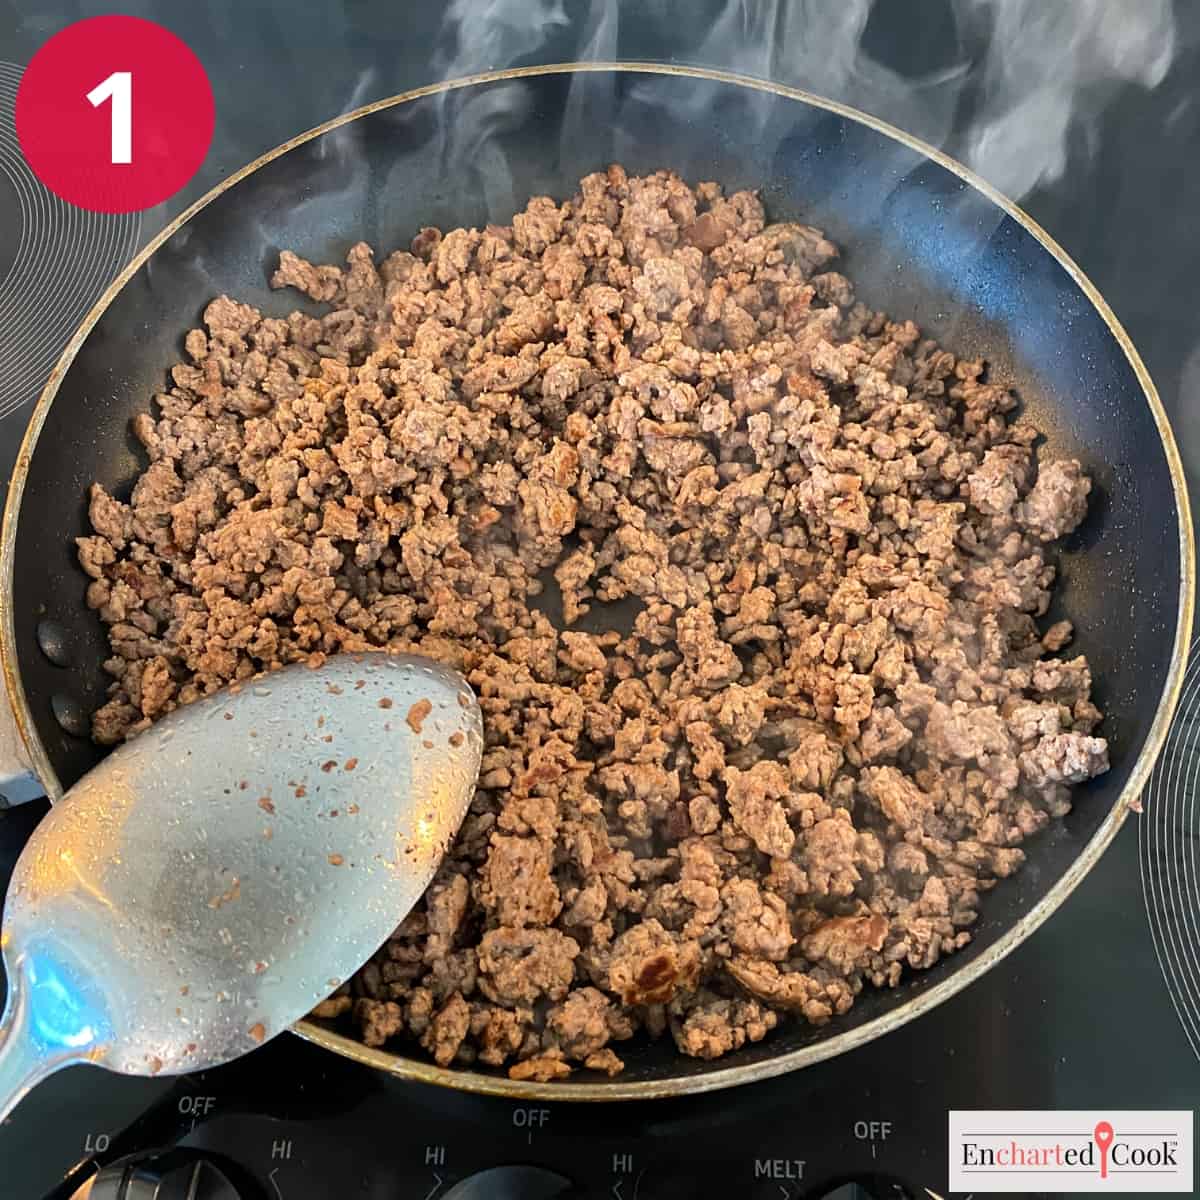 Process Photo 1 - Browning the ground beef in a skillet.